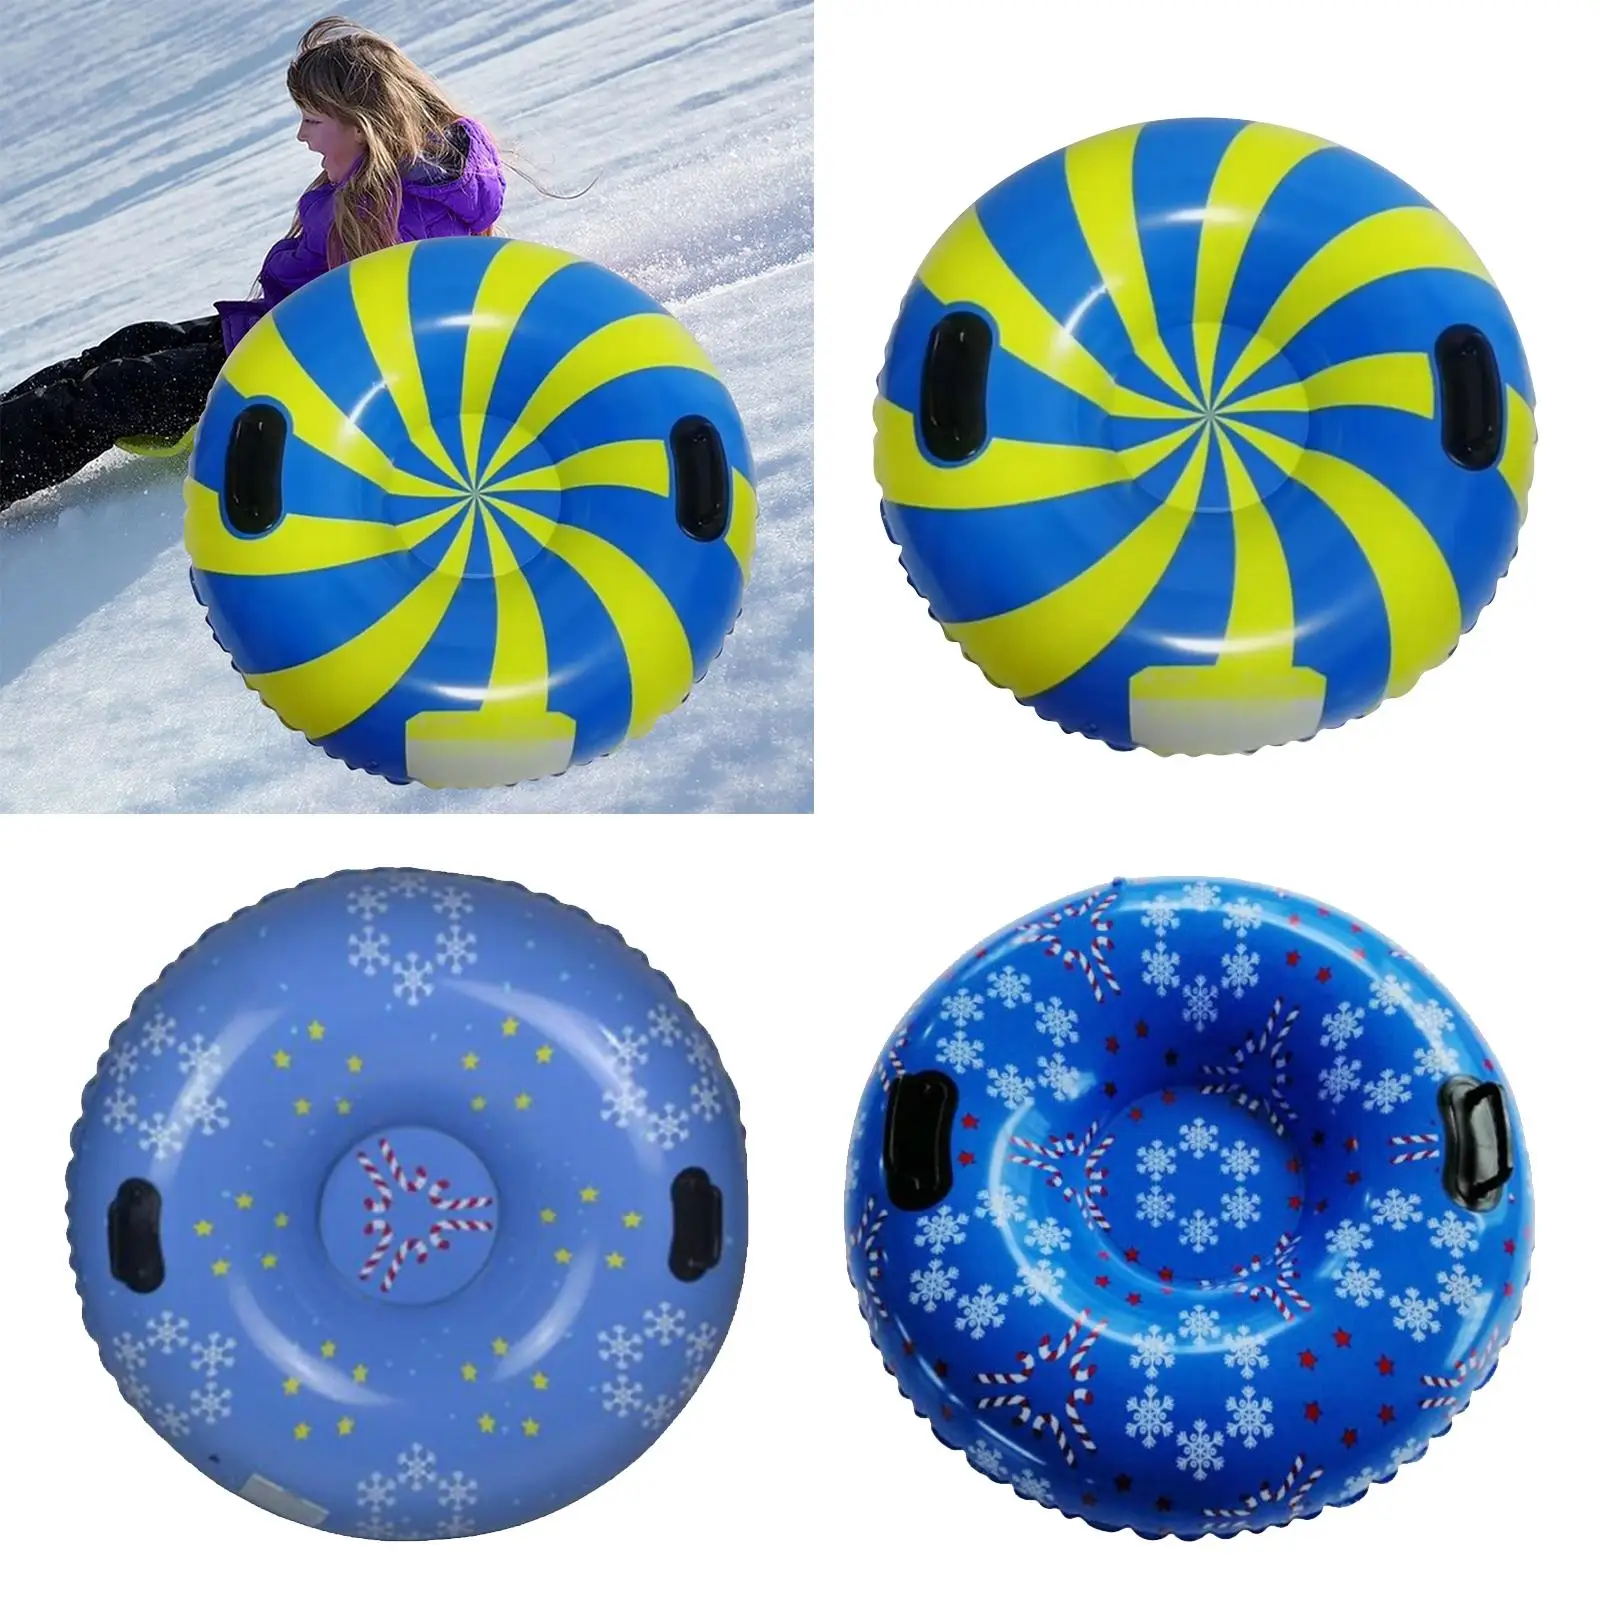 Winter Snow Tude with Handle - Inflatable Sled for Kids and Adults Outdoor Ski